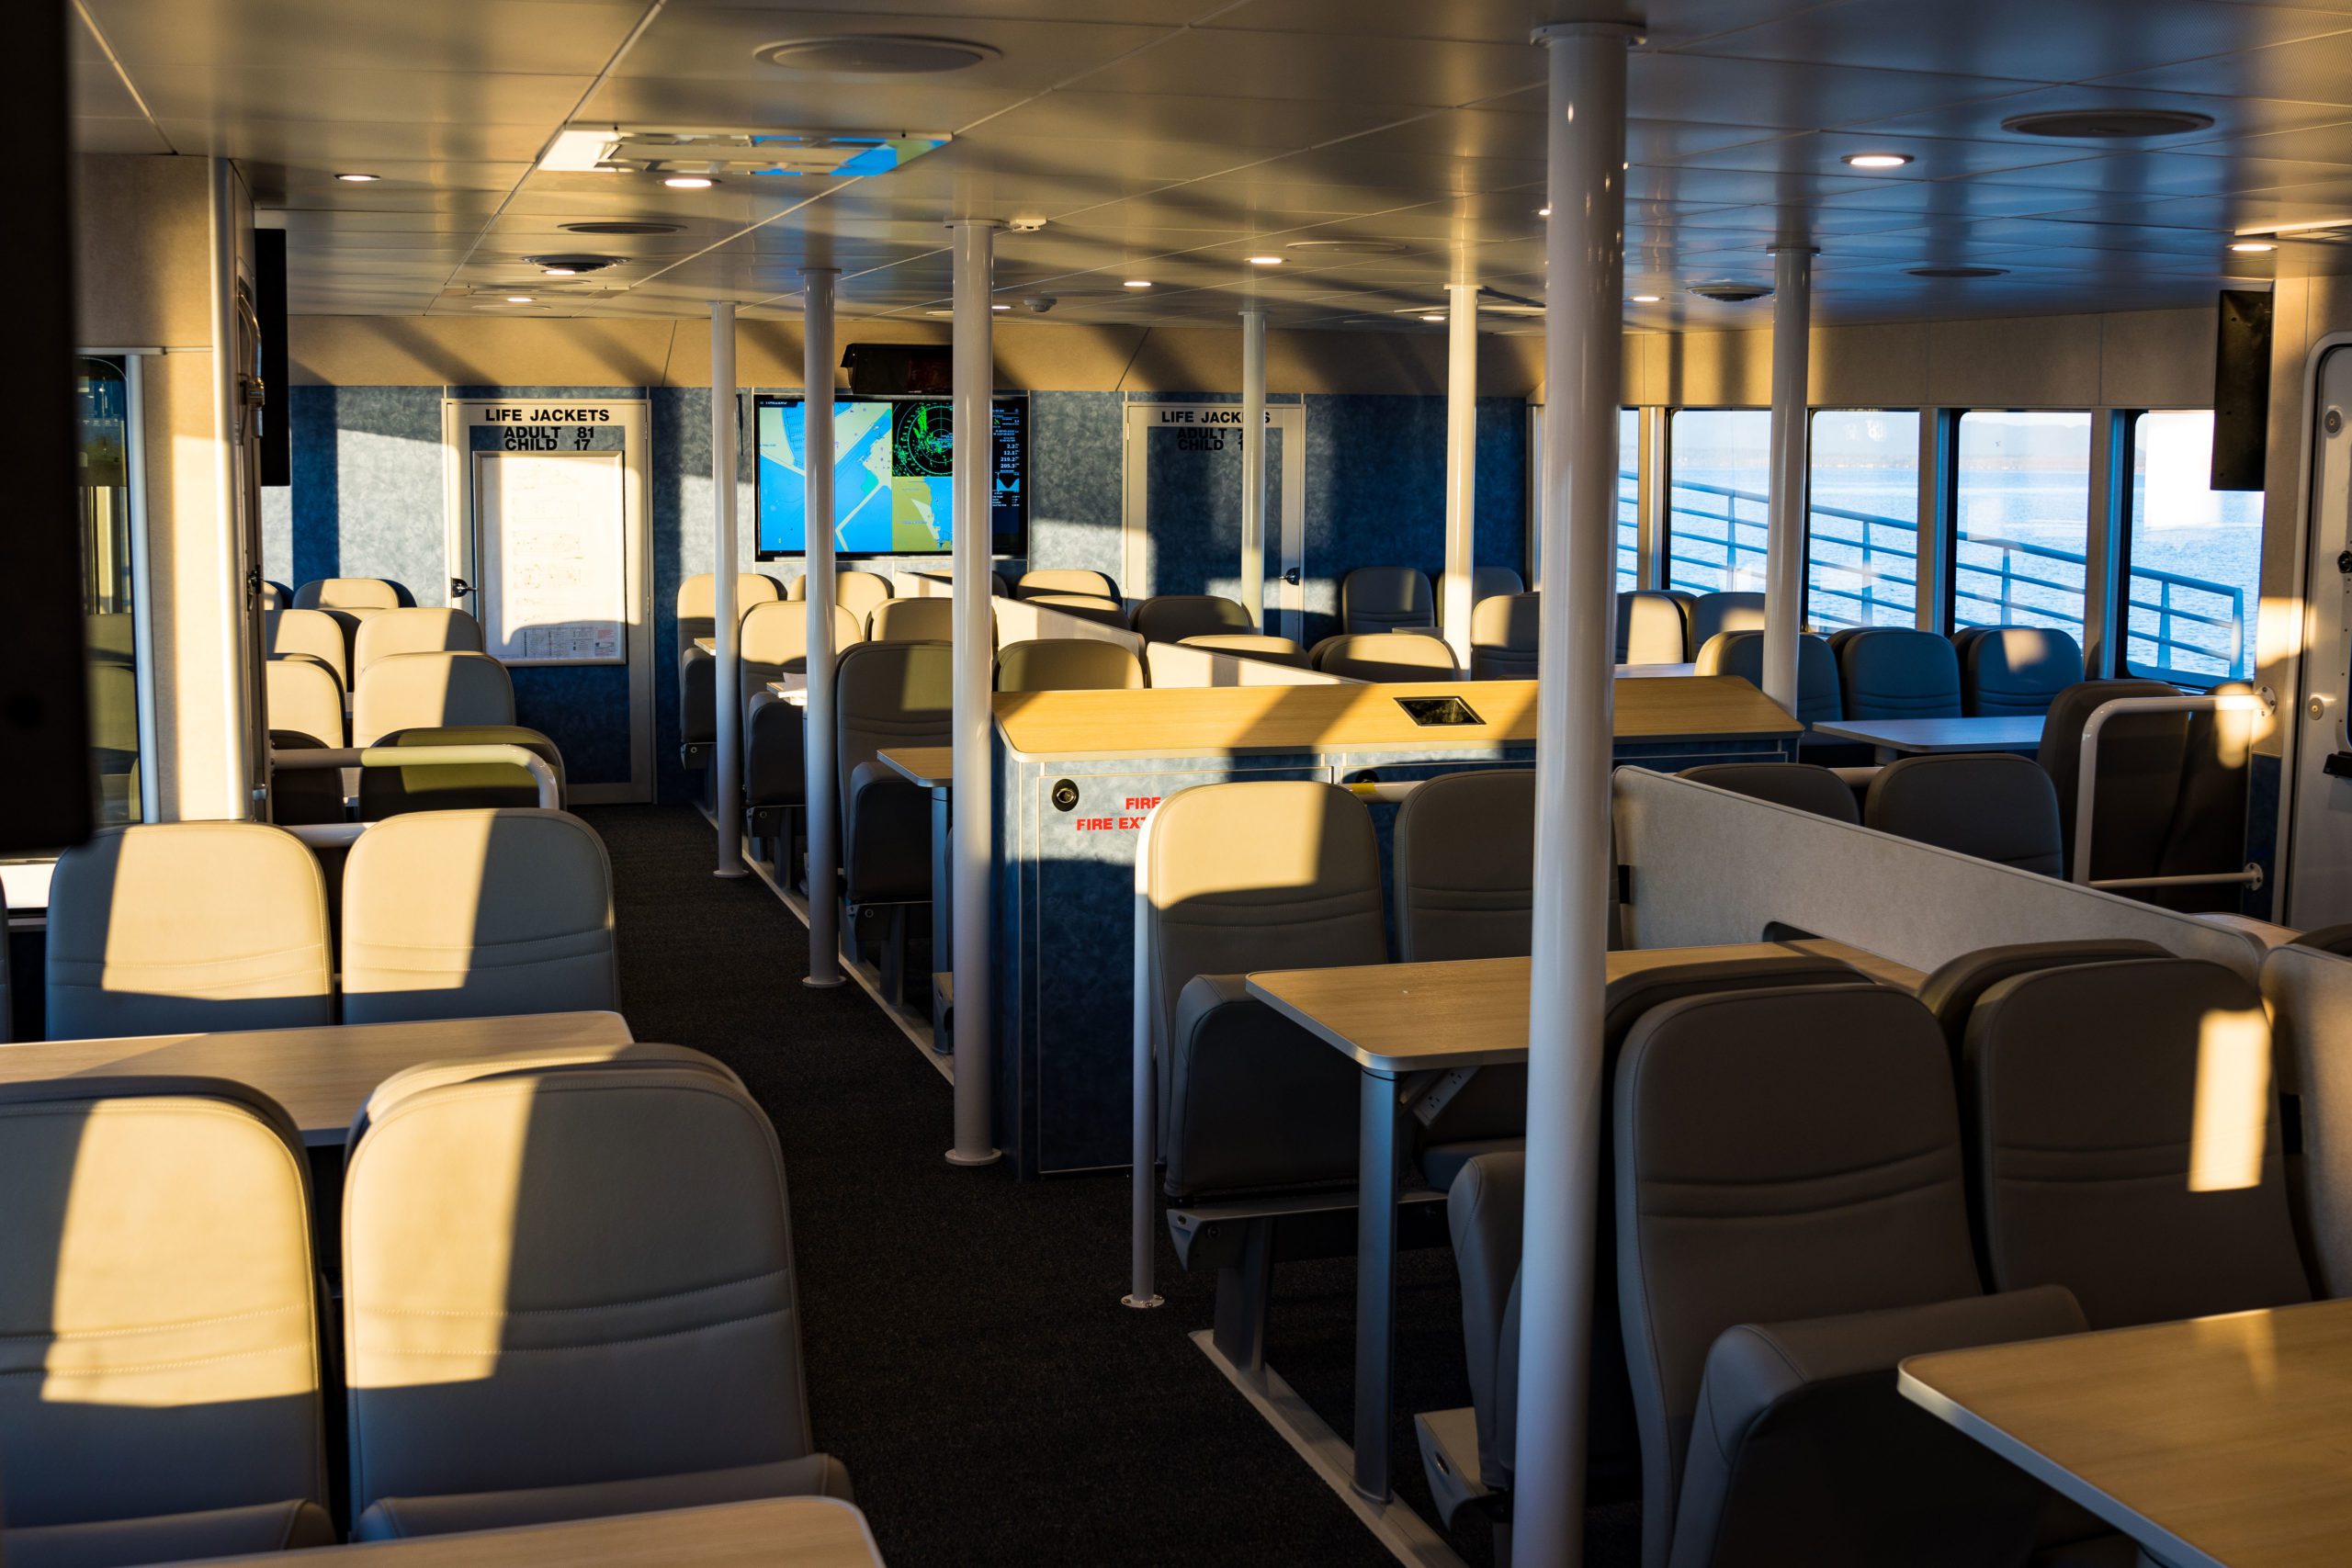 The vessel’s main cabin is packed with amenities to keep passengers comfortable and happy.